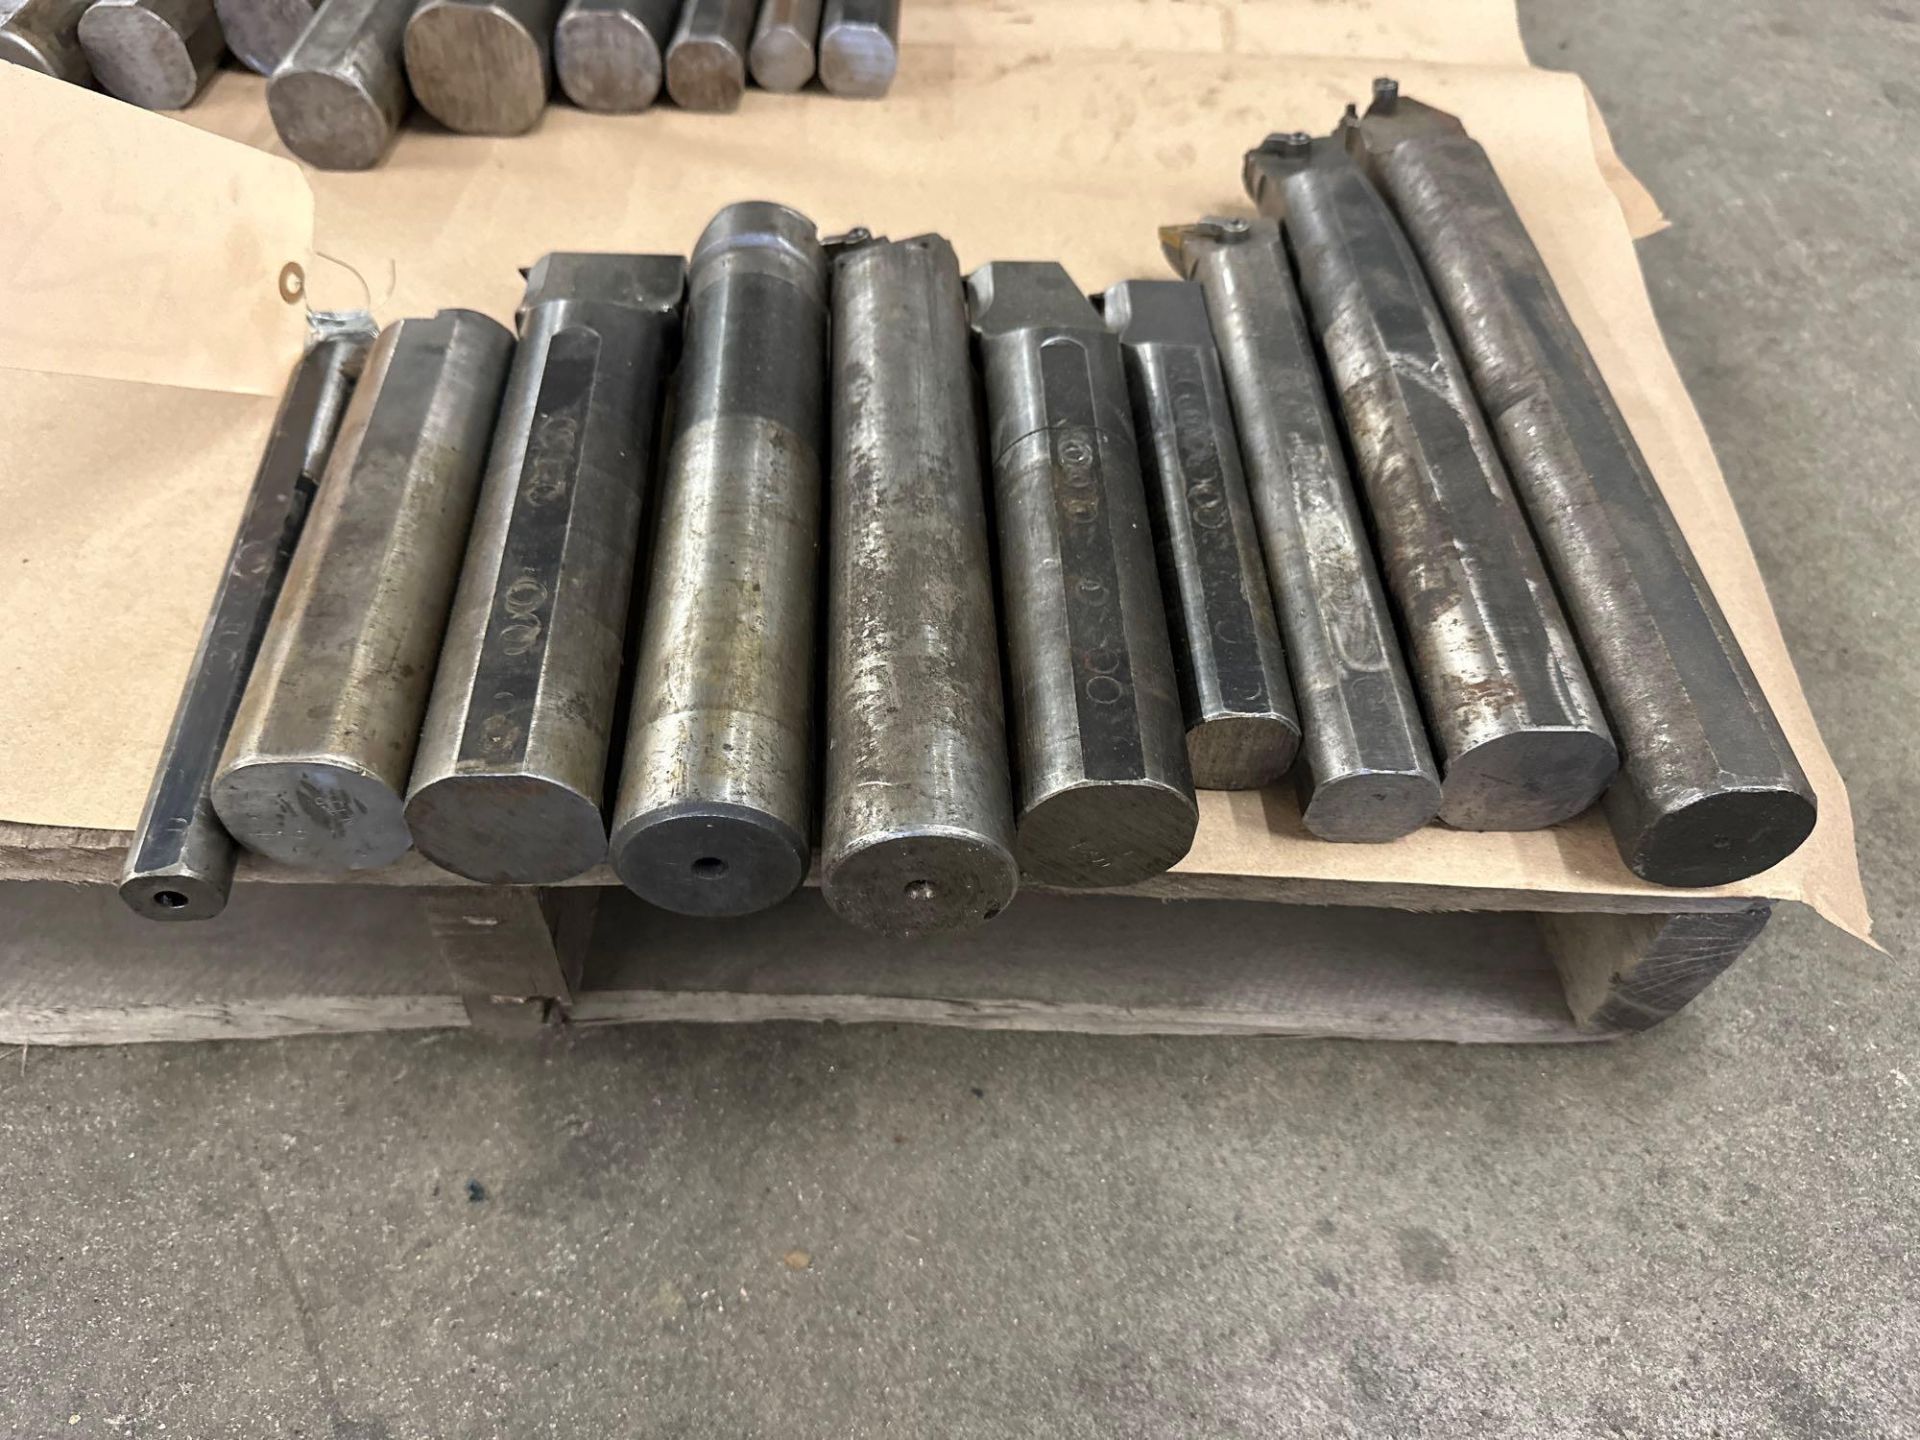 Lot of 10 Assorted Indexable Boring Bars Ranging From: 7/8” X 10 1/4” to 2” X 15 3/4” - Image 6 of 6